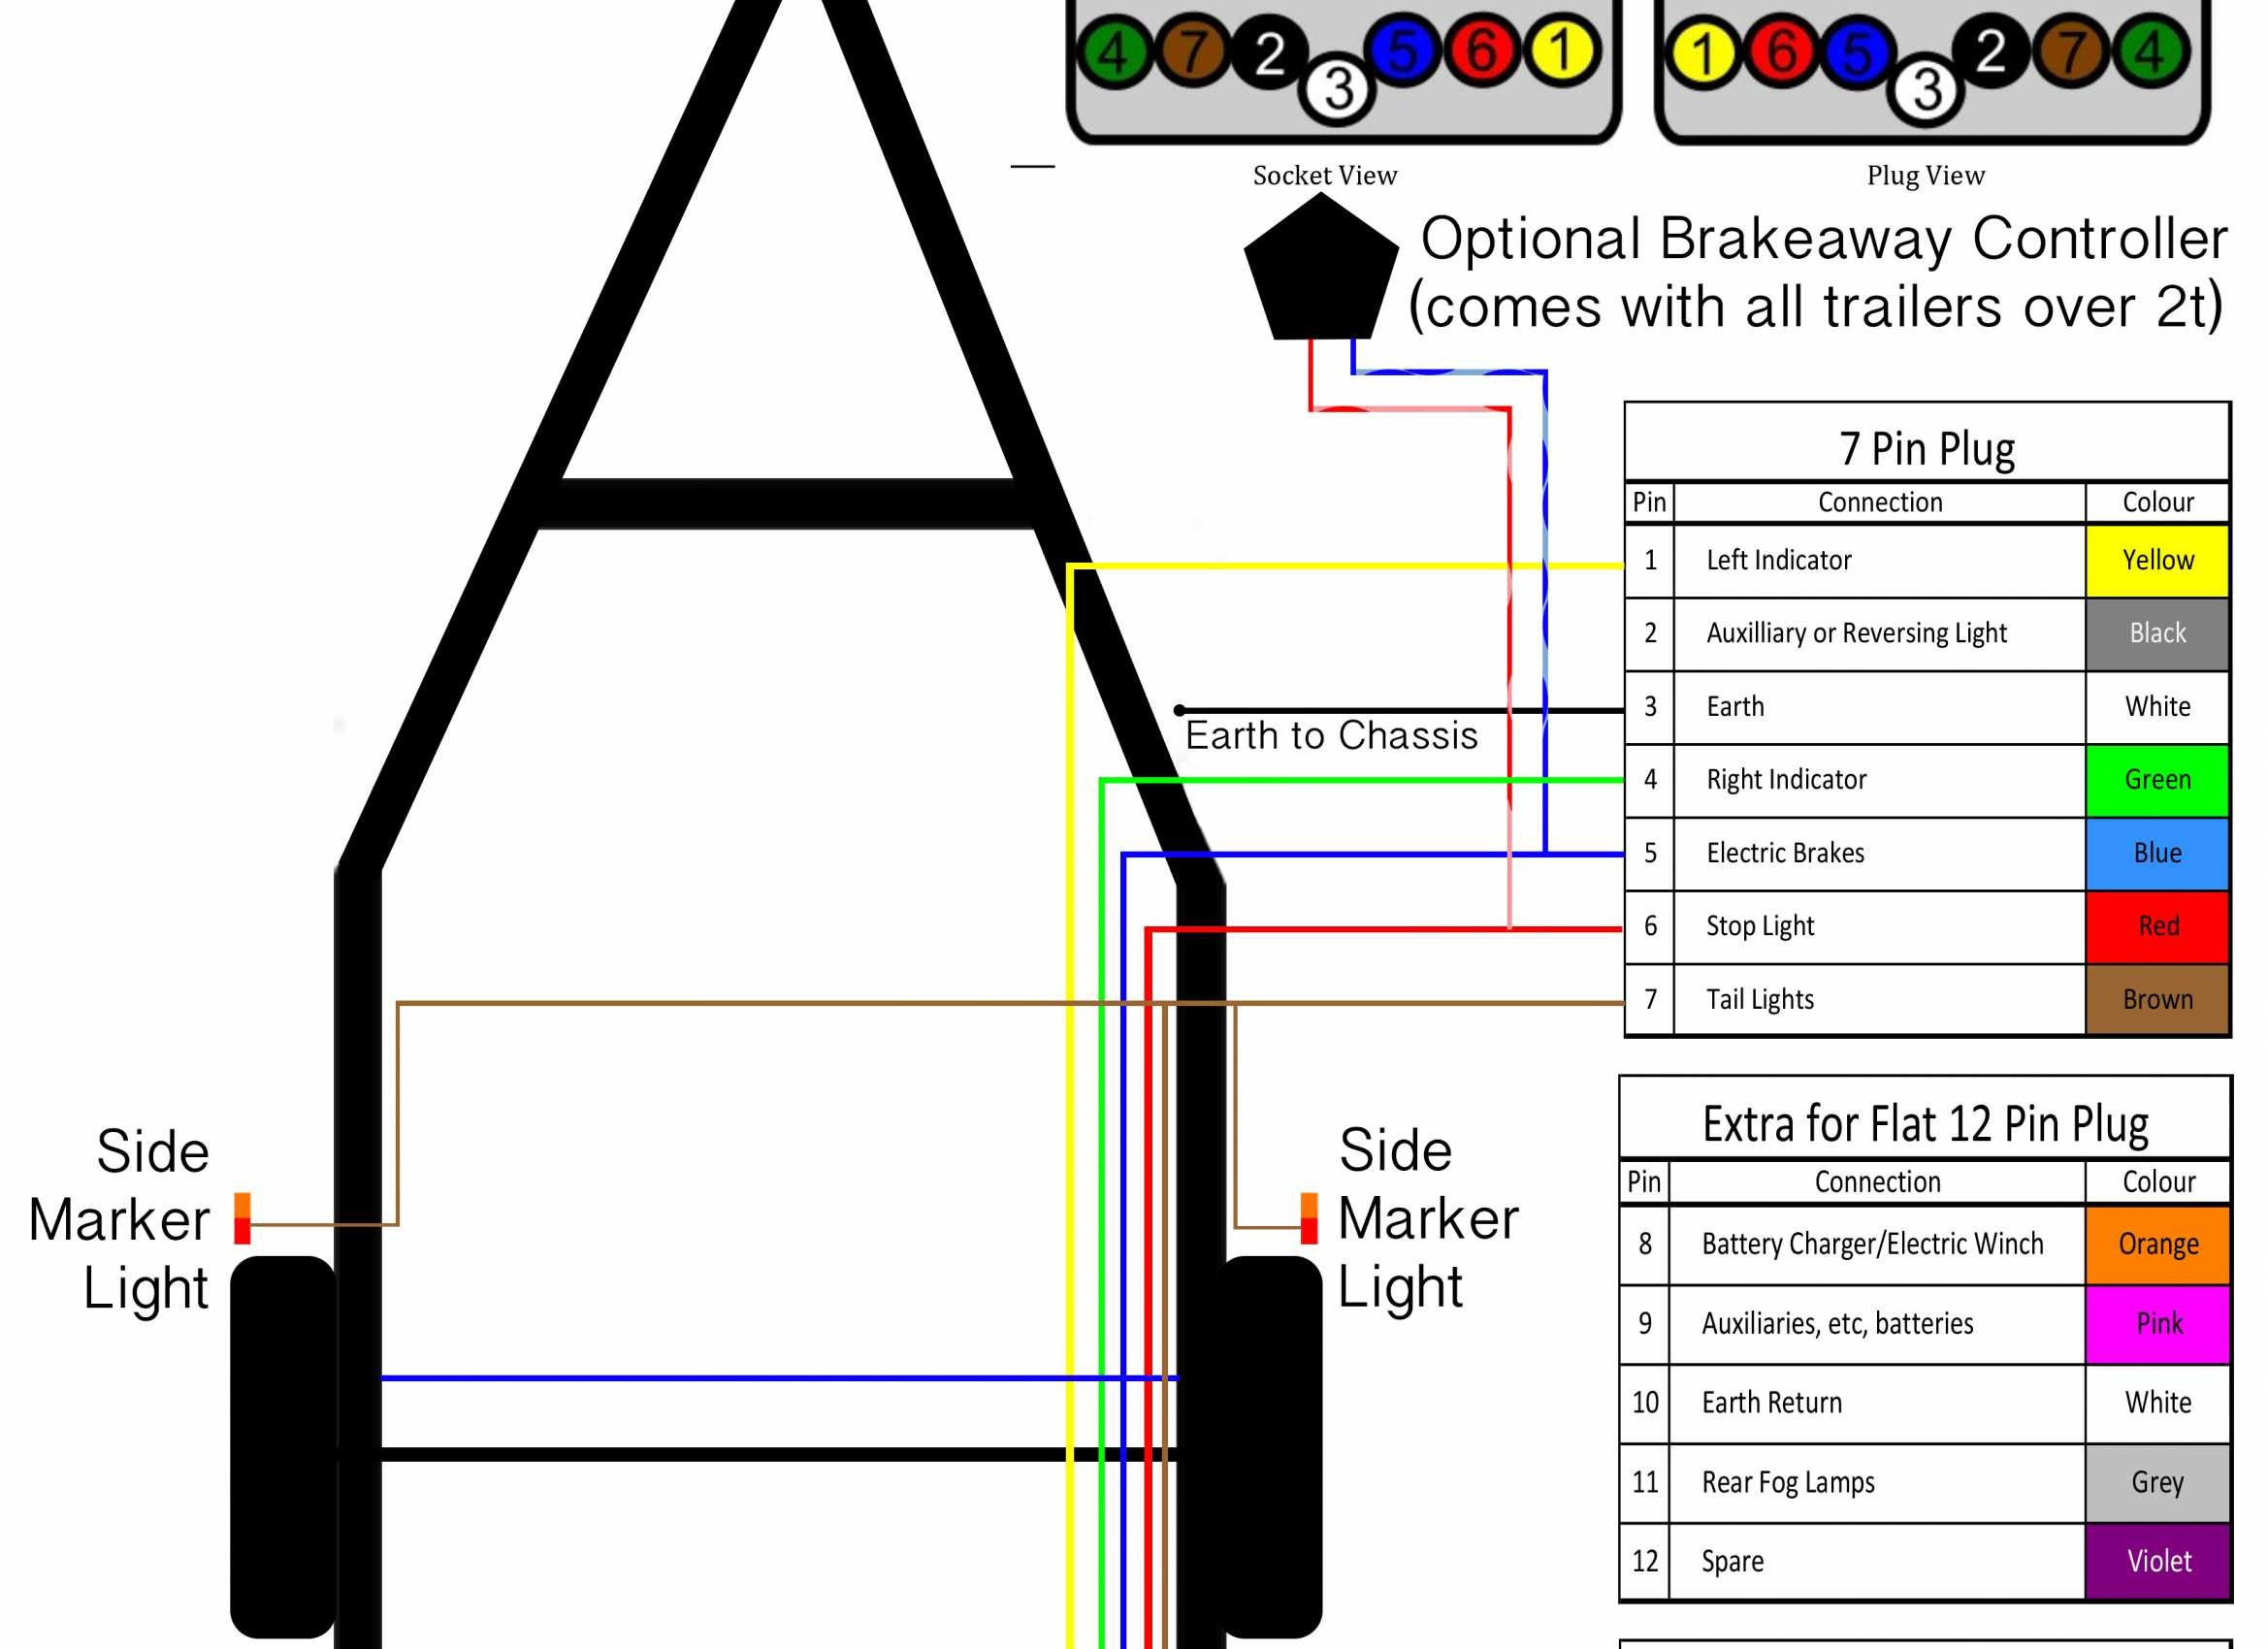 Wiring Diagram For Trailer Plug With Electric Brakes